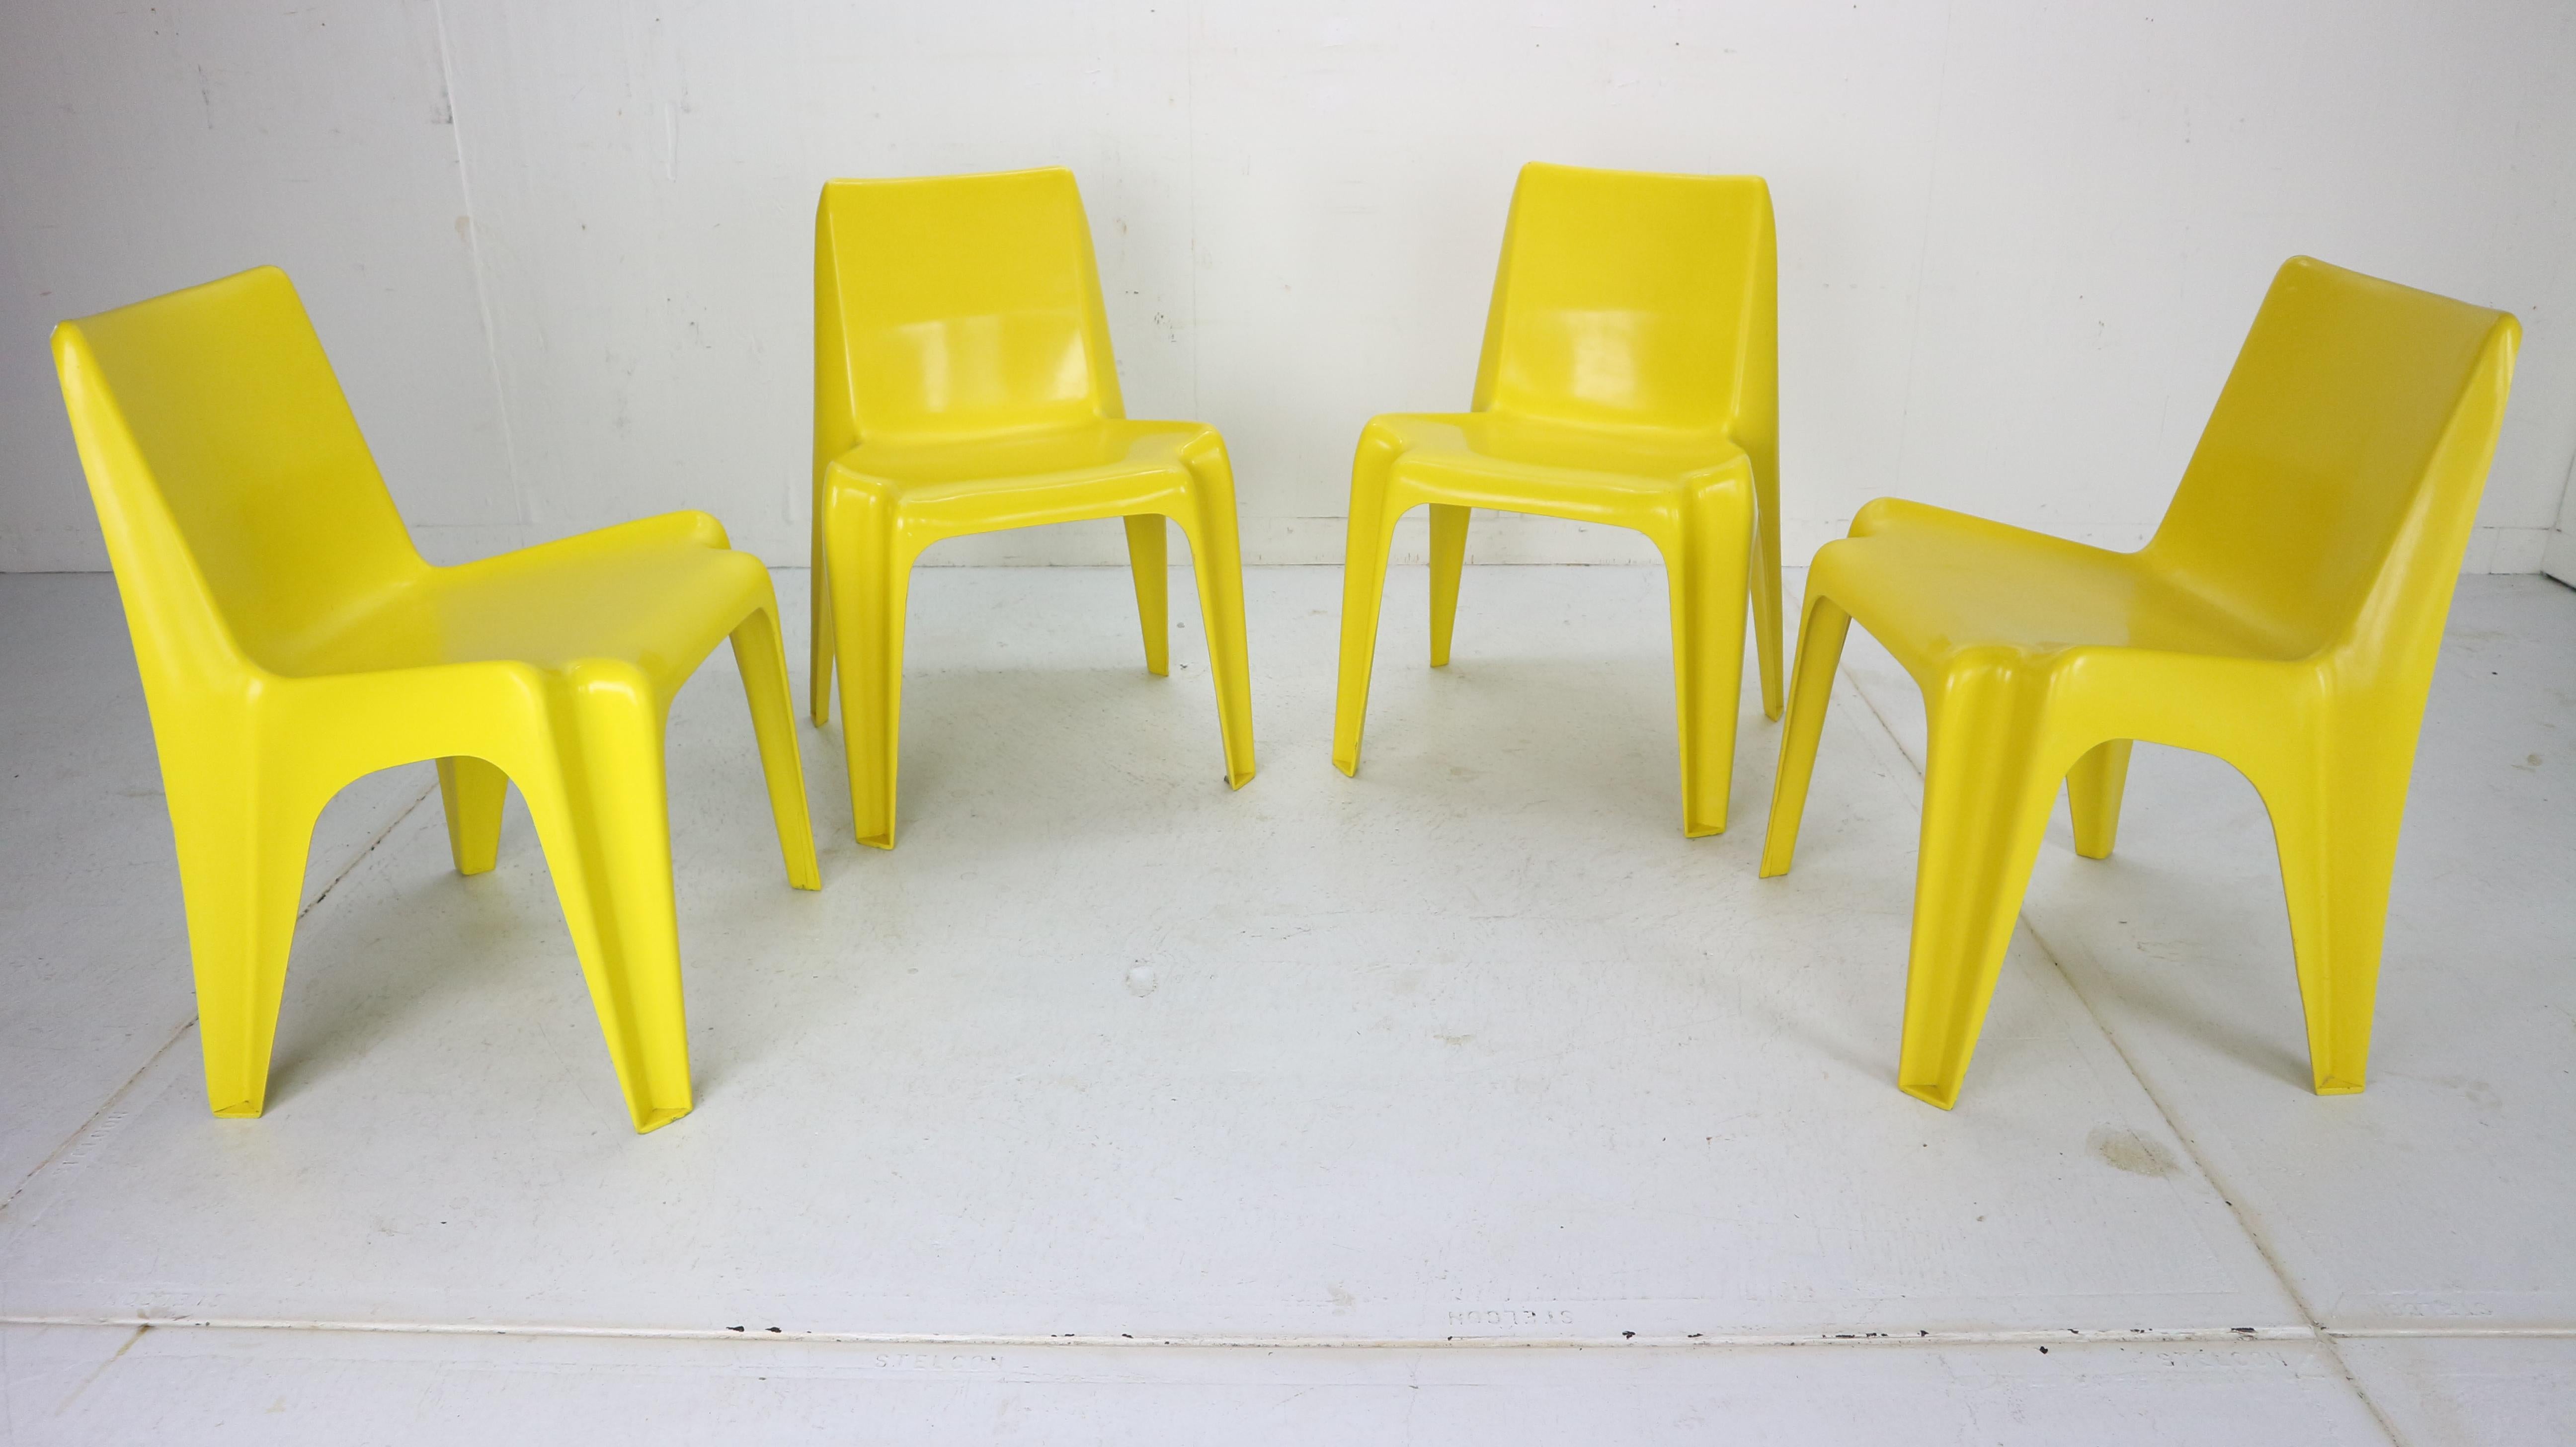 Set of 4 chairs (model BA 1171) were designed by architect and designer Helmit Bätzner in 1964 in close co-operation with the Bofinger company in Germany. The stackable so-called Bofinger chairs was the first one-piece plastic chair in fiberglass-